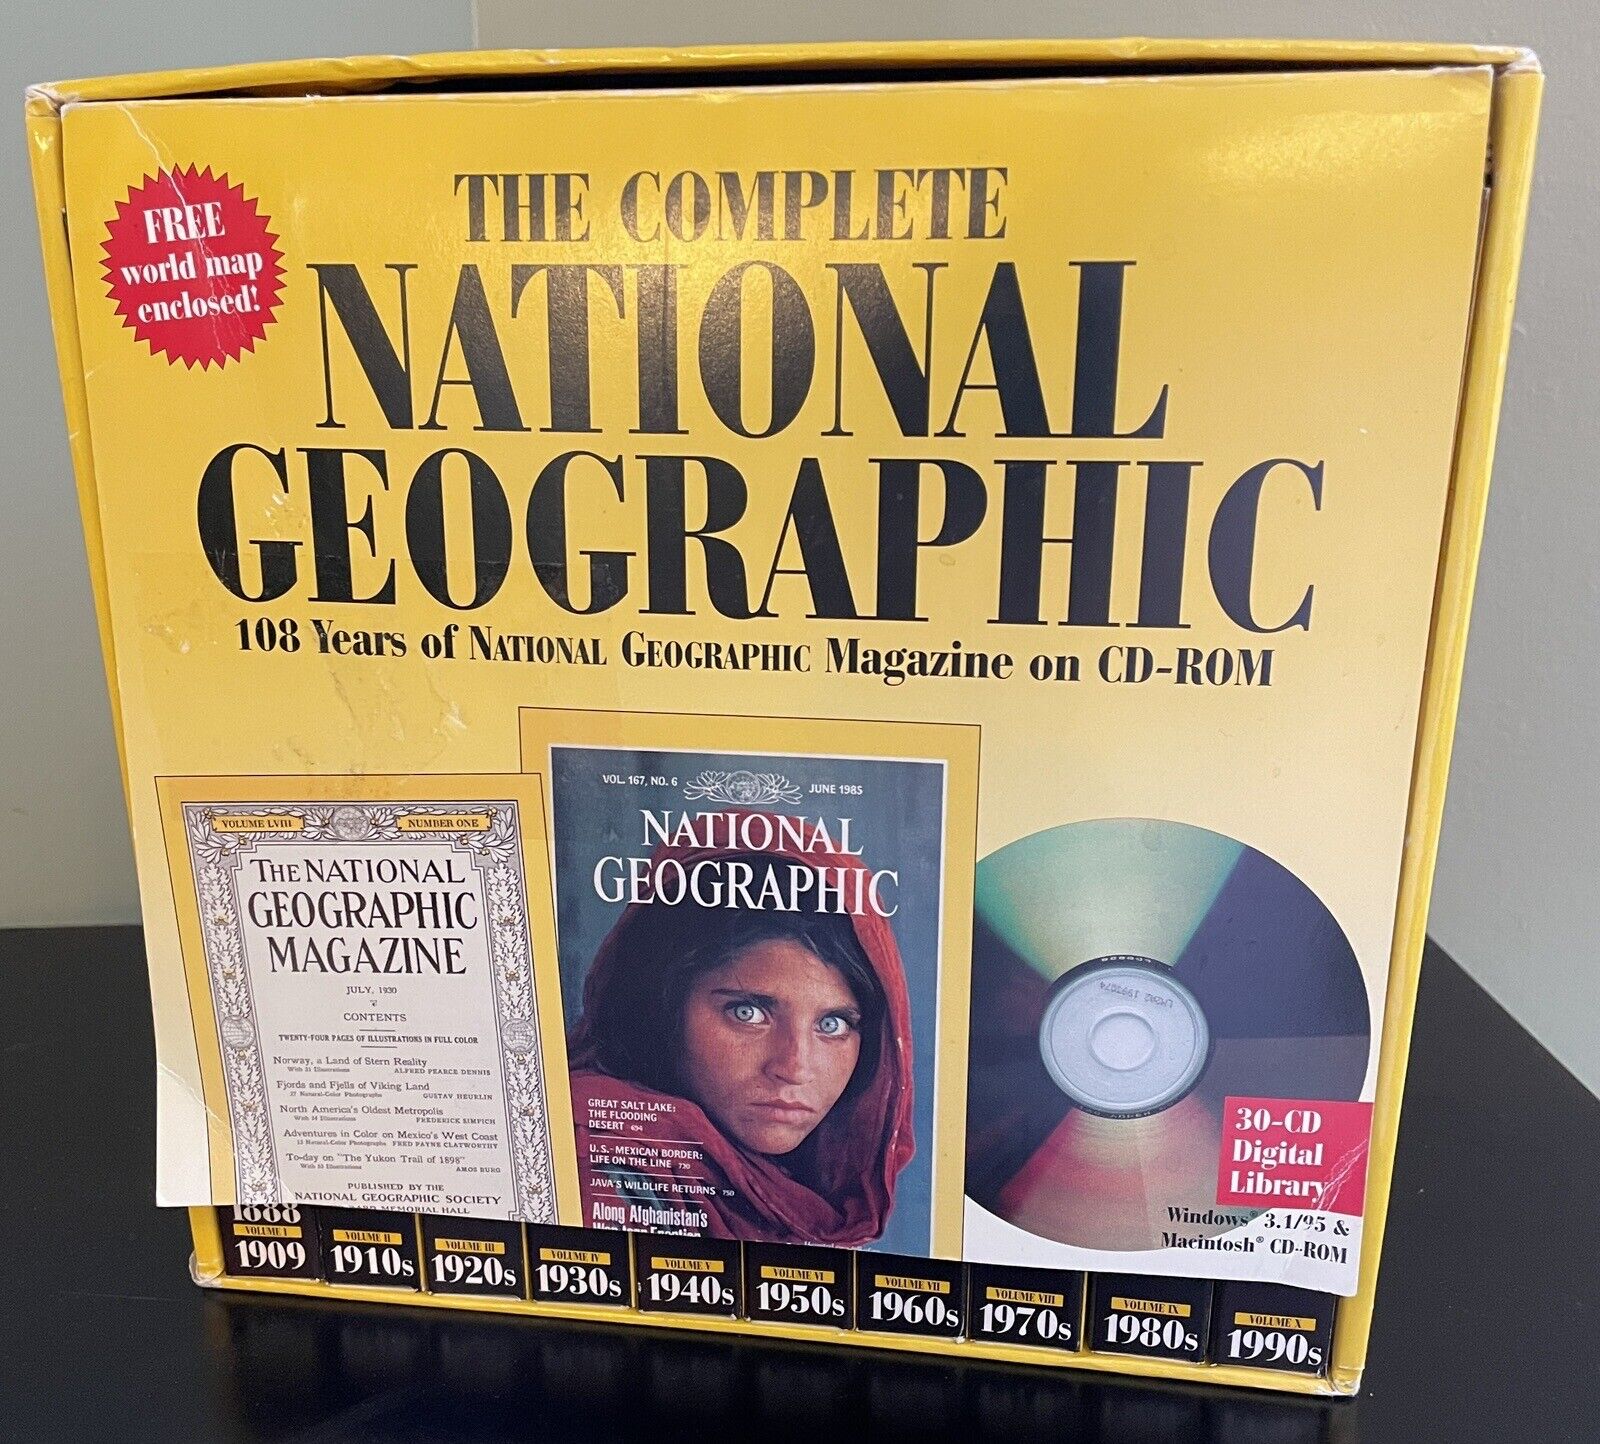 The Complete National Geographic Magazine 108 Years on CD-ROM